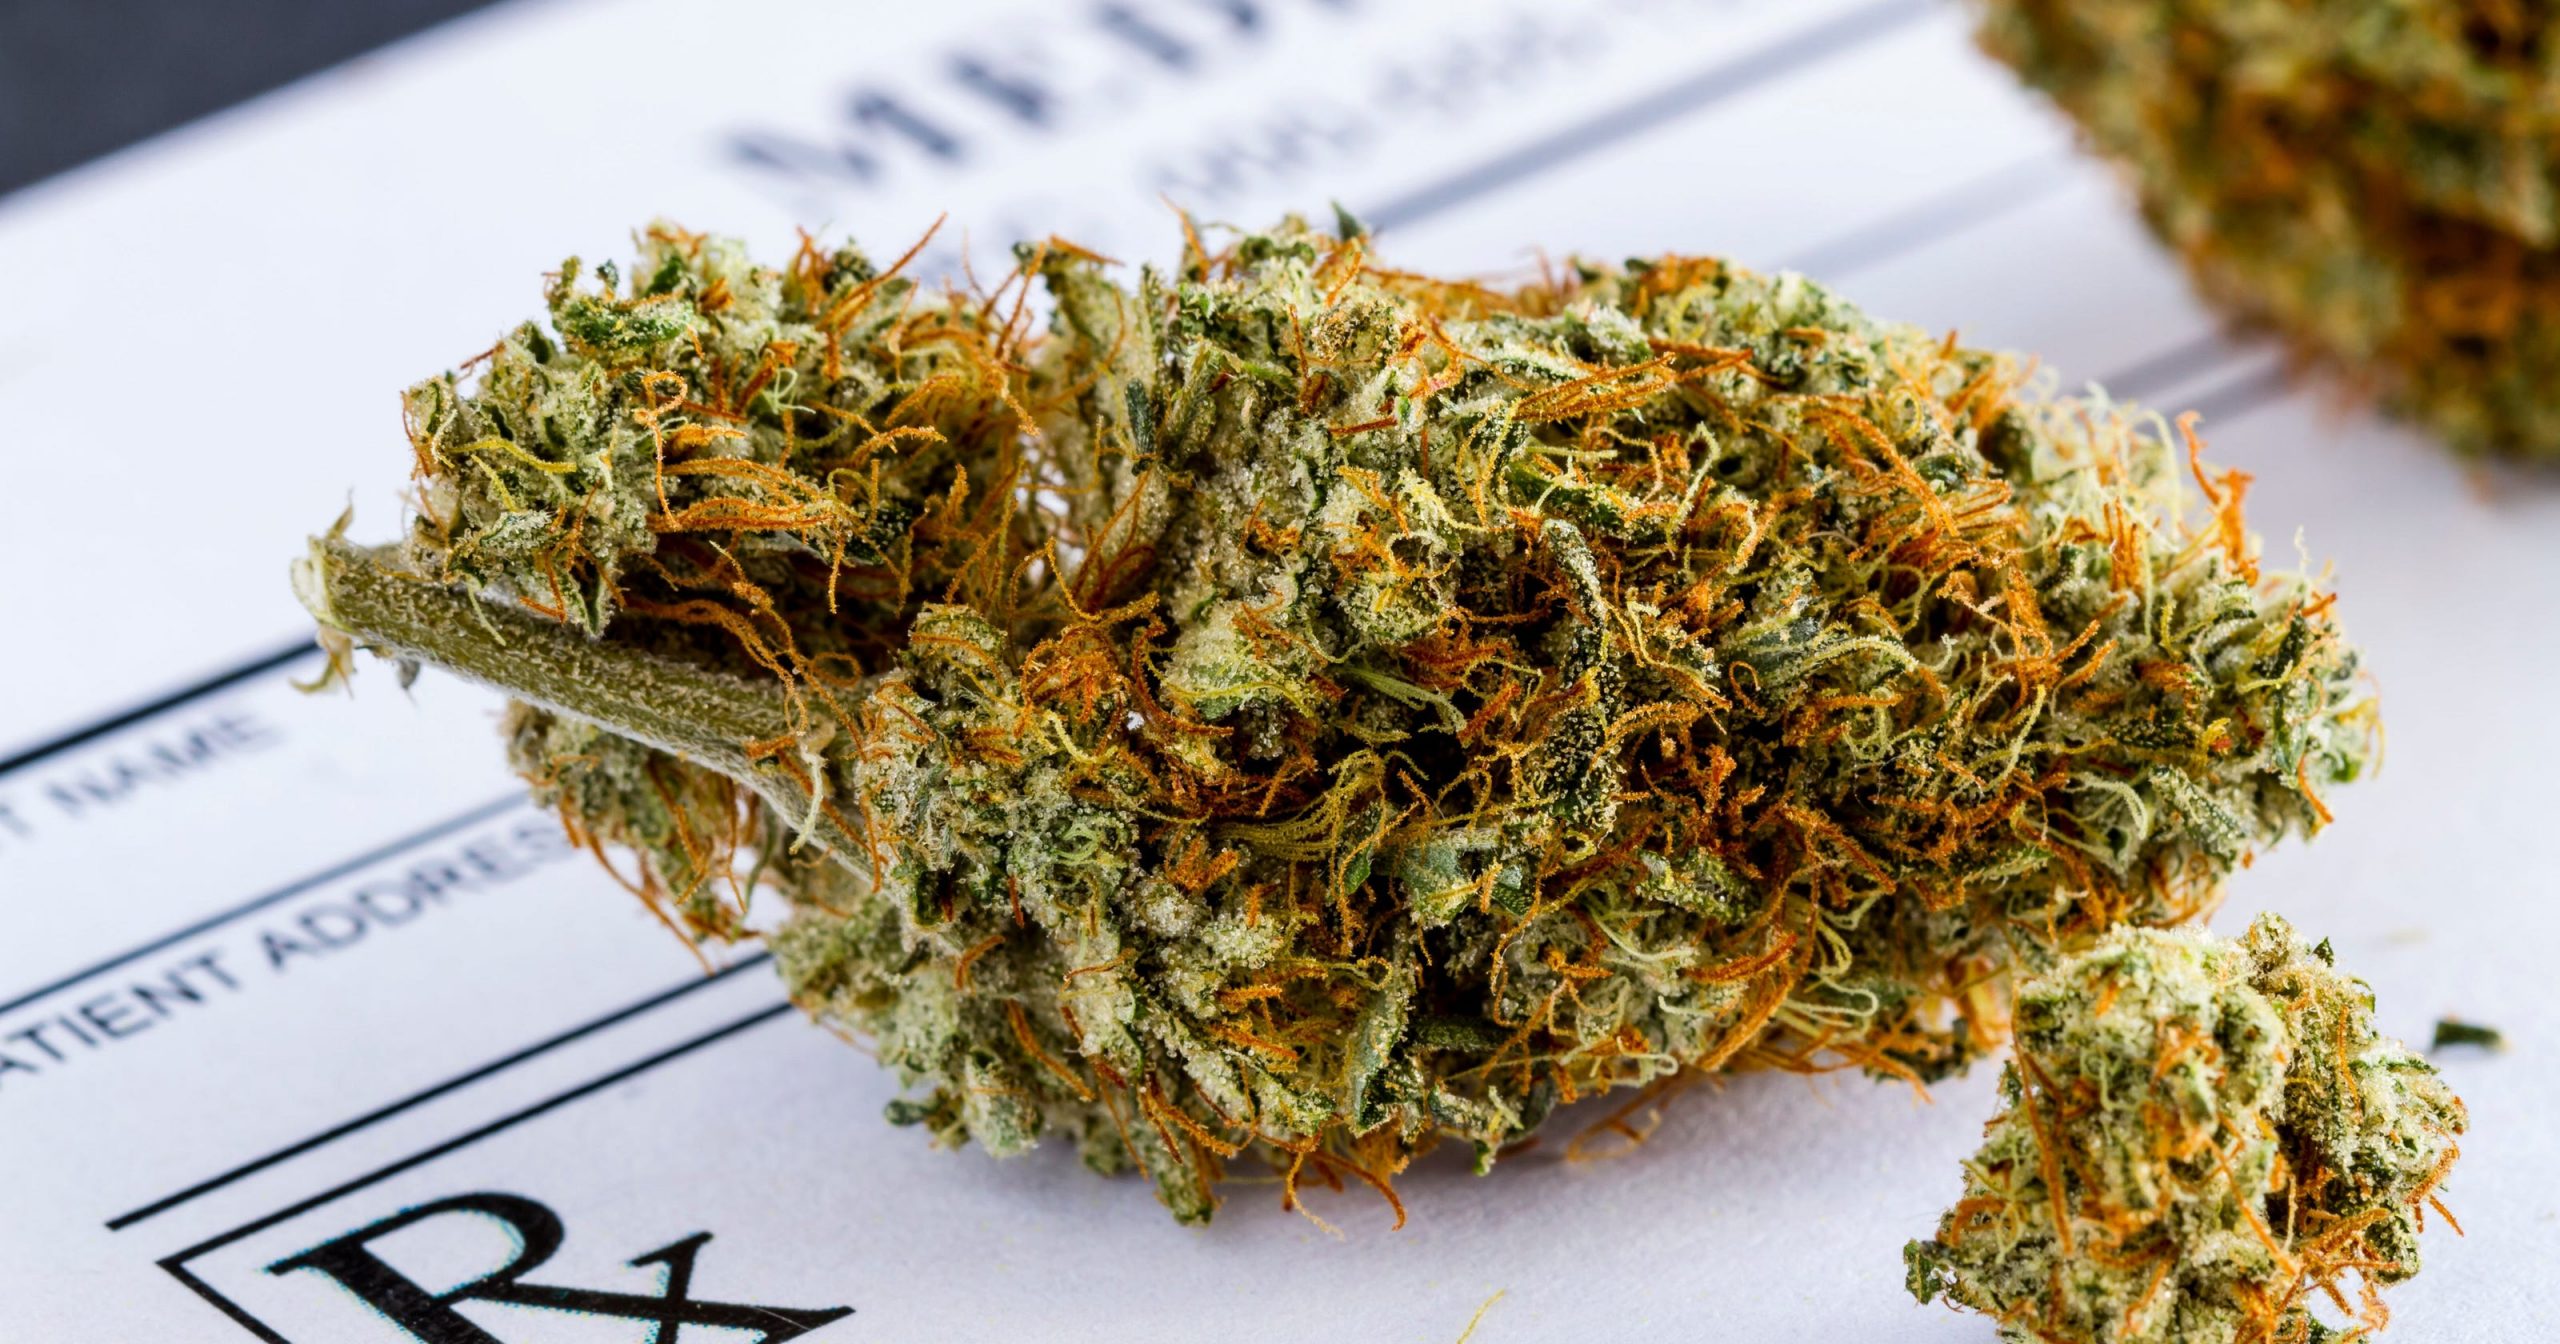 What Are Medical Marijuana Recommendations?